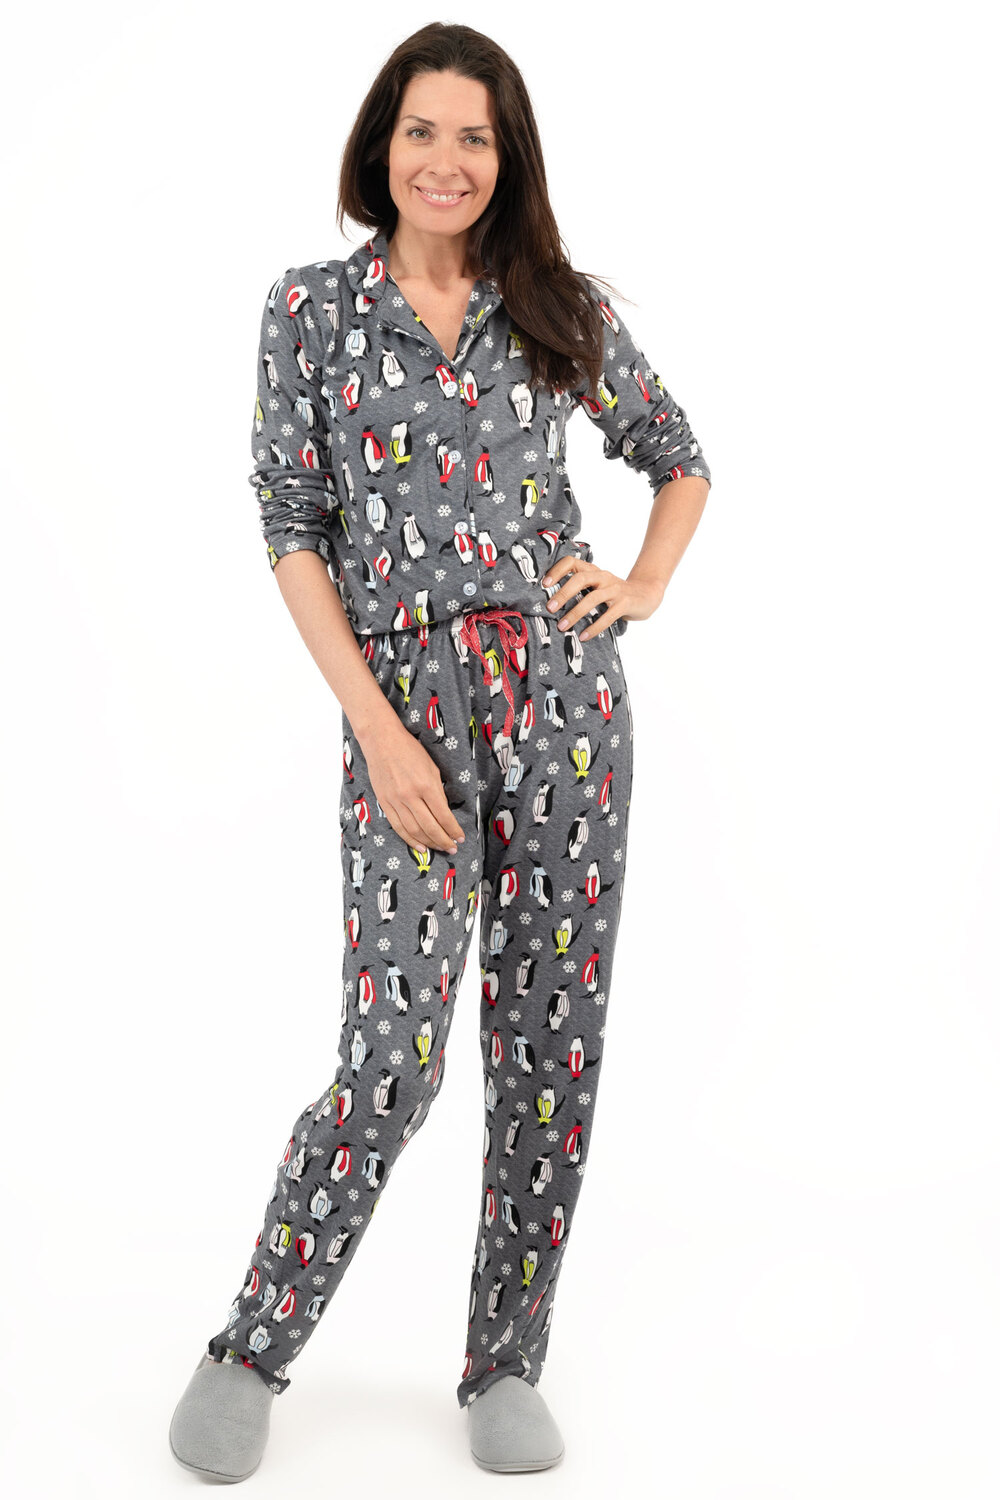 Charmour - Button-up PJ gift set with notch collar - Penguin fashion